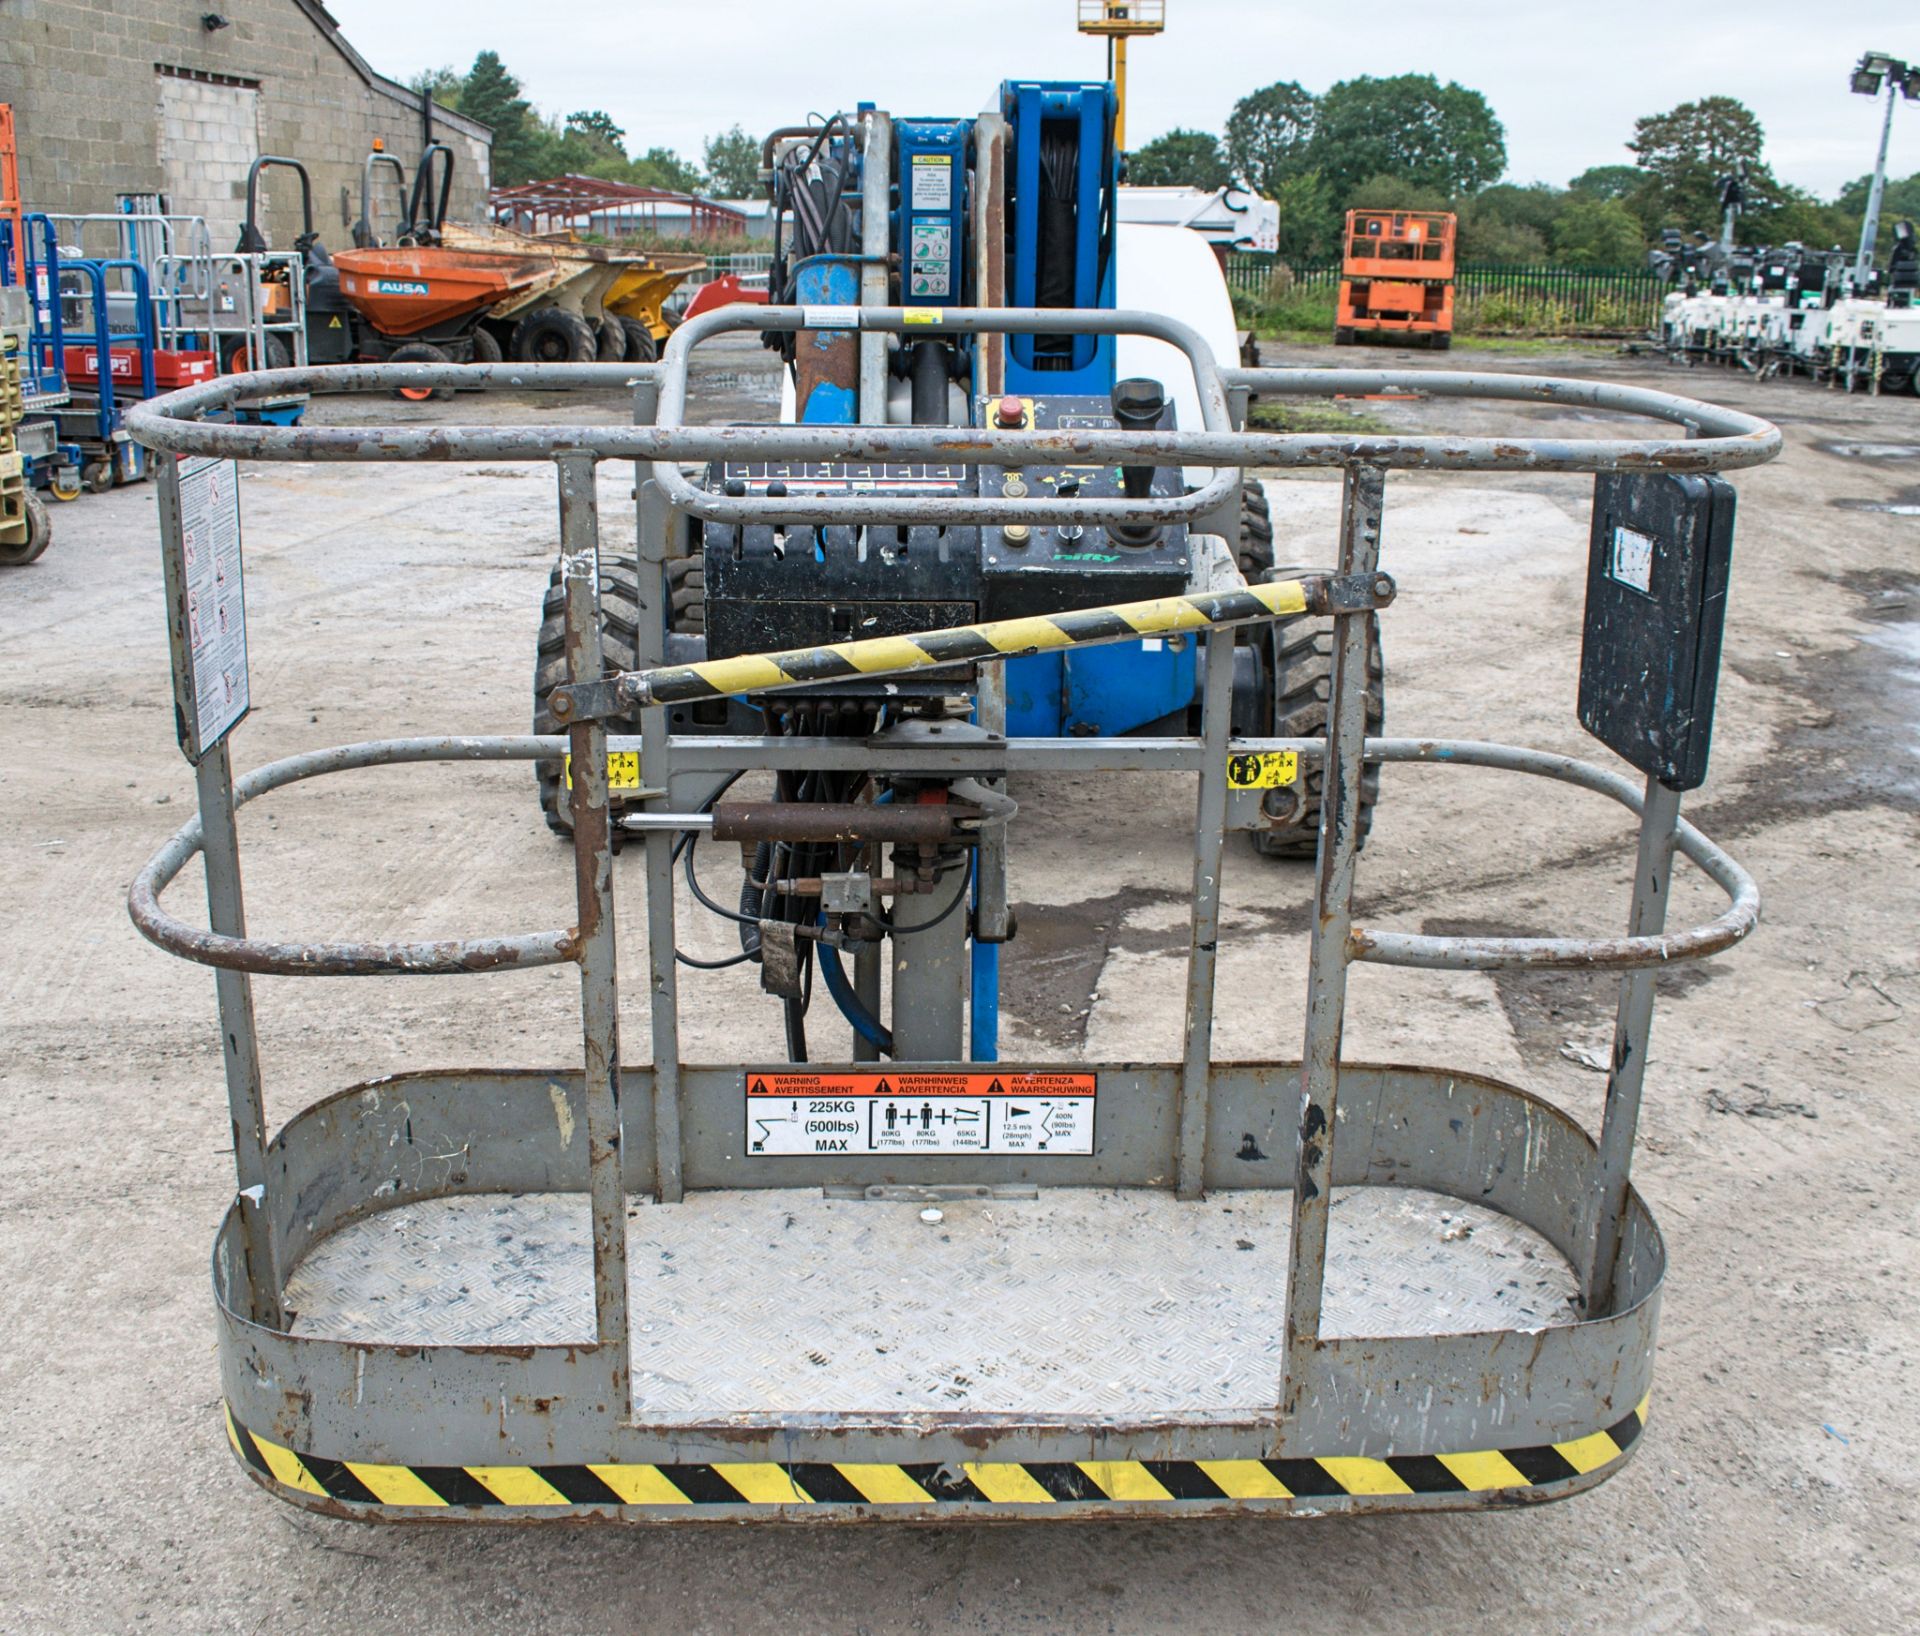 Niftylift HR 21 D diesel driven 4 wheel drive boom lift access platform  Year: 2006 S/N: 2113695 - Image 5 of 12